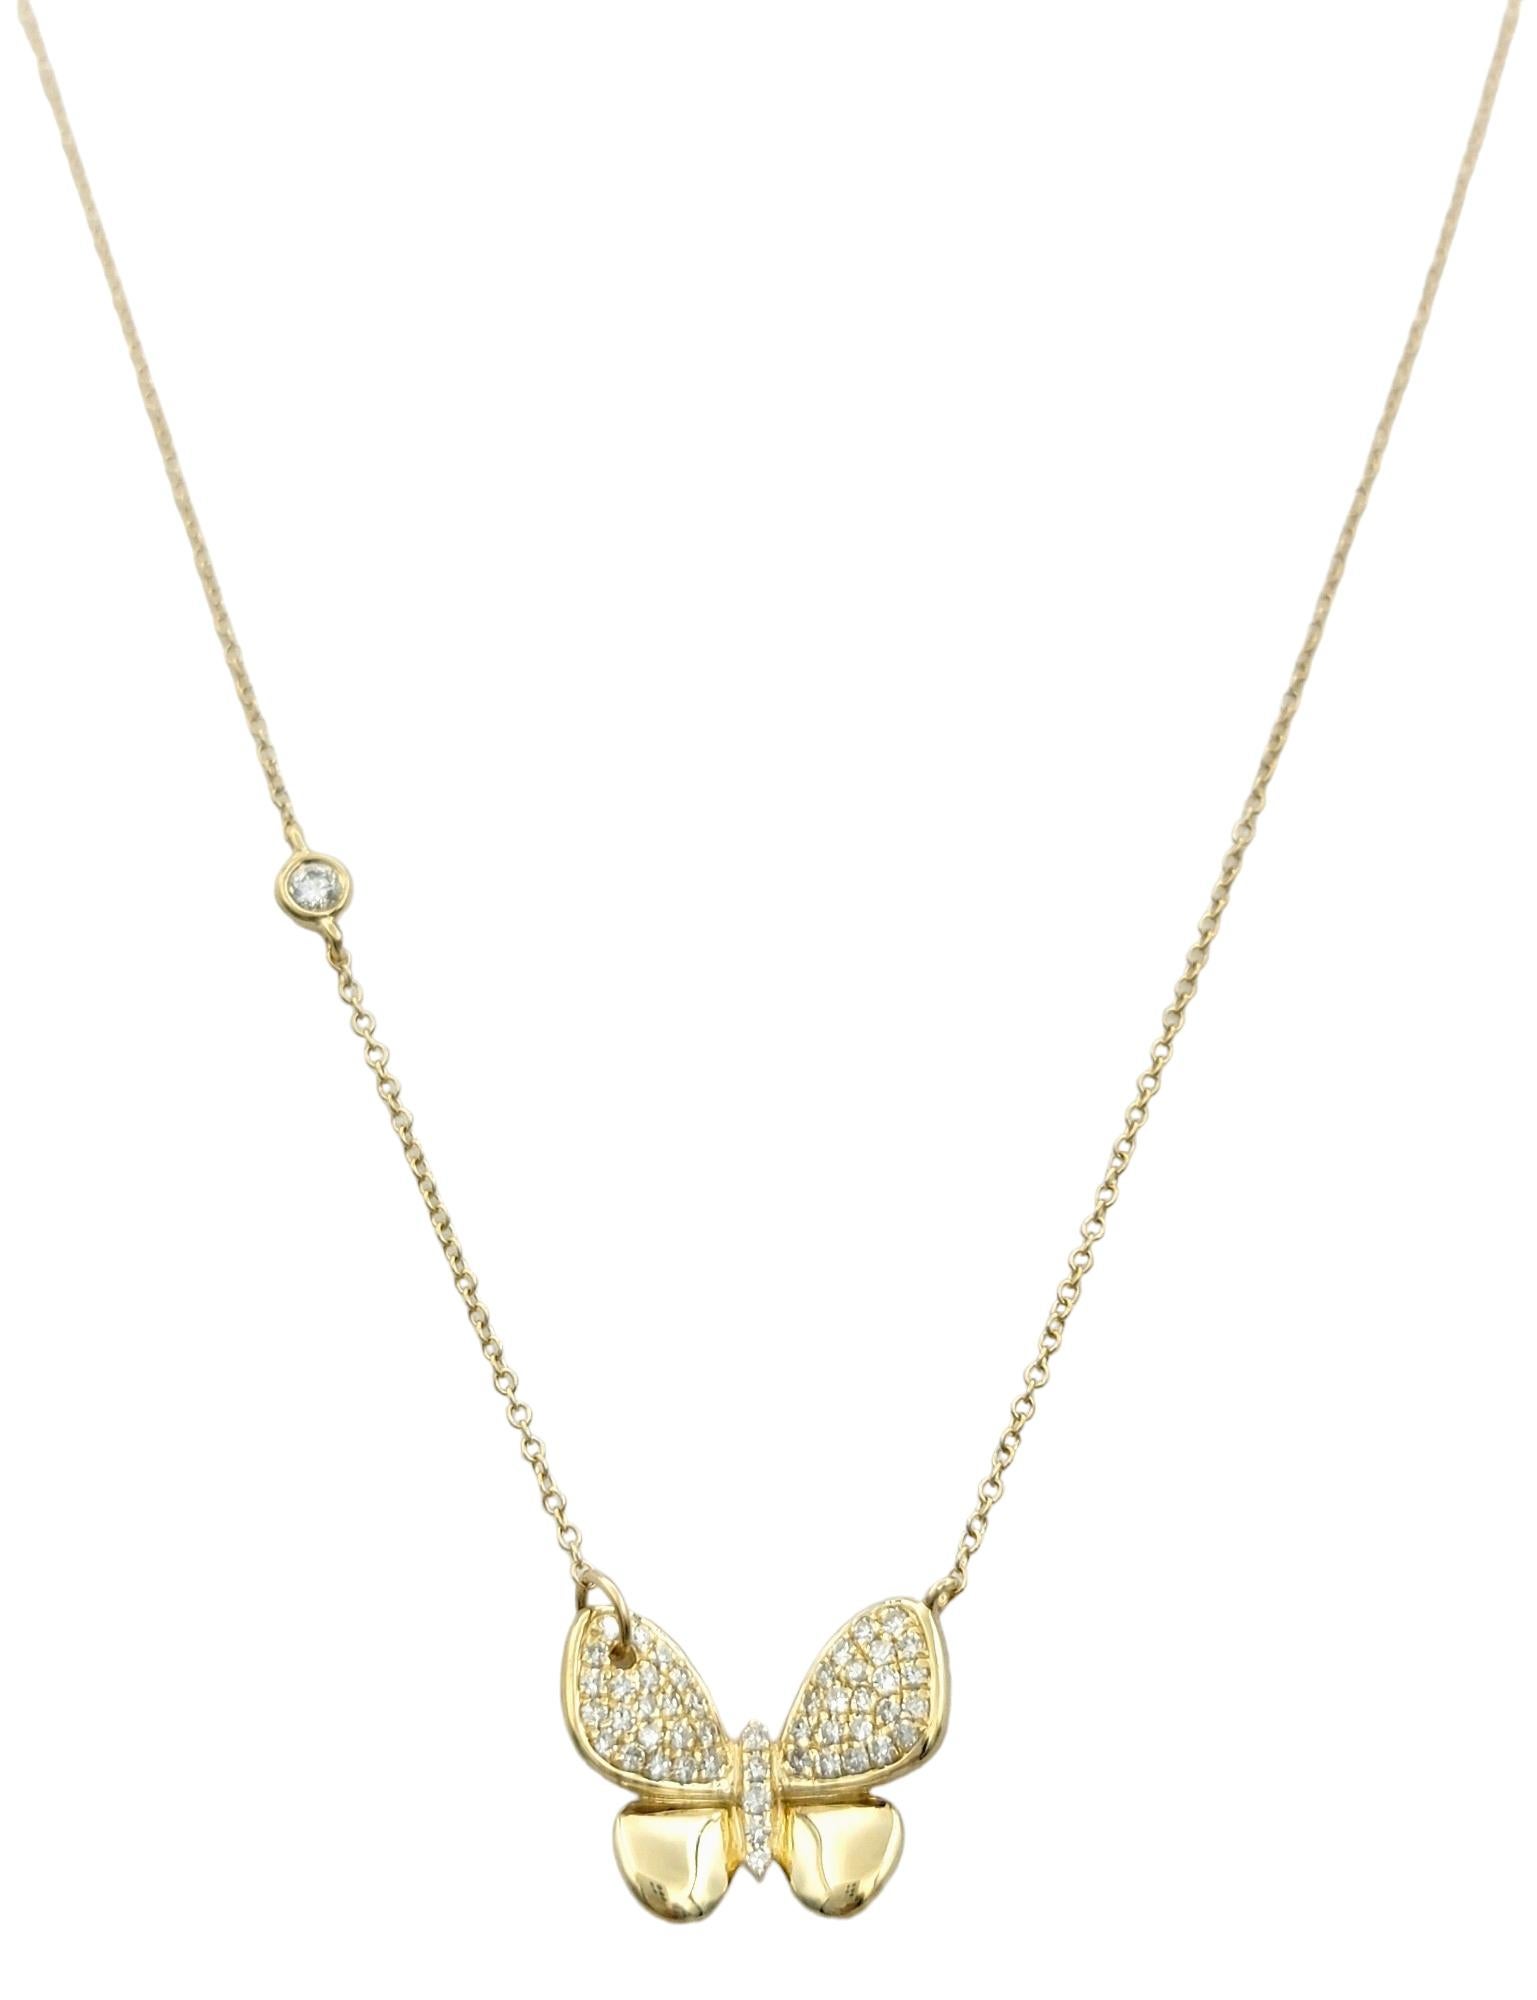 This stunning Effy diamond butterfly necklace, set in 14 karat yellow gold, exudes whimsical charm and elegant sophistication. Its centerpiece, a delicately crafted butterfly pendant, captures the imagination with its graceful form and shimmering